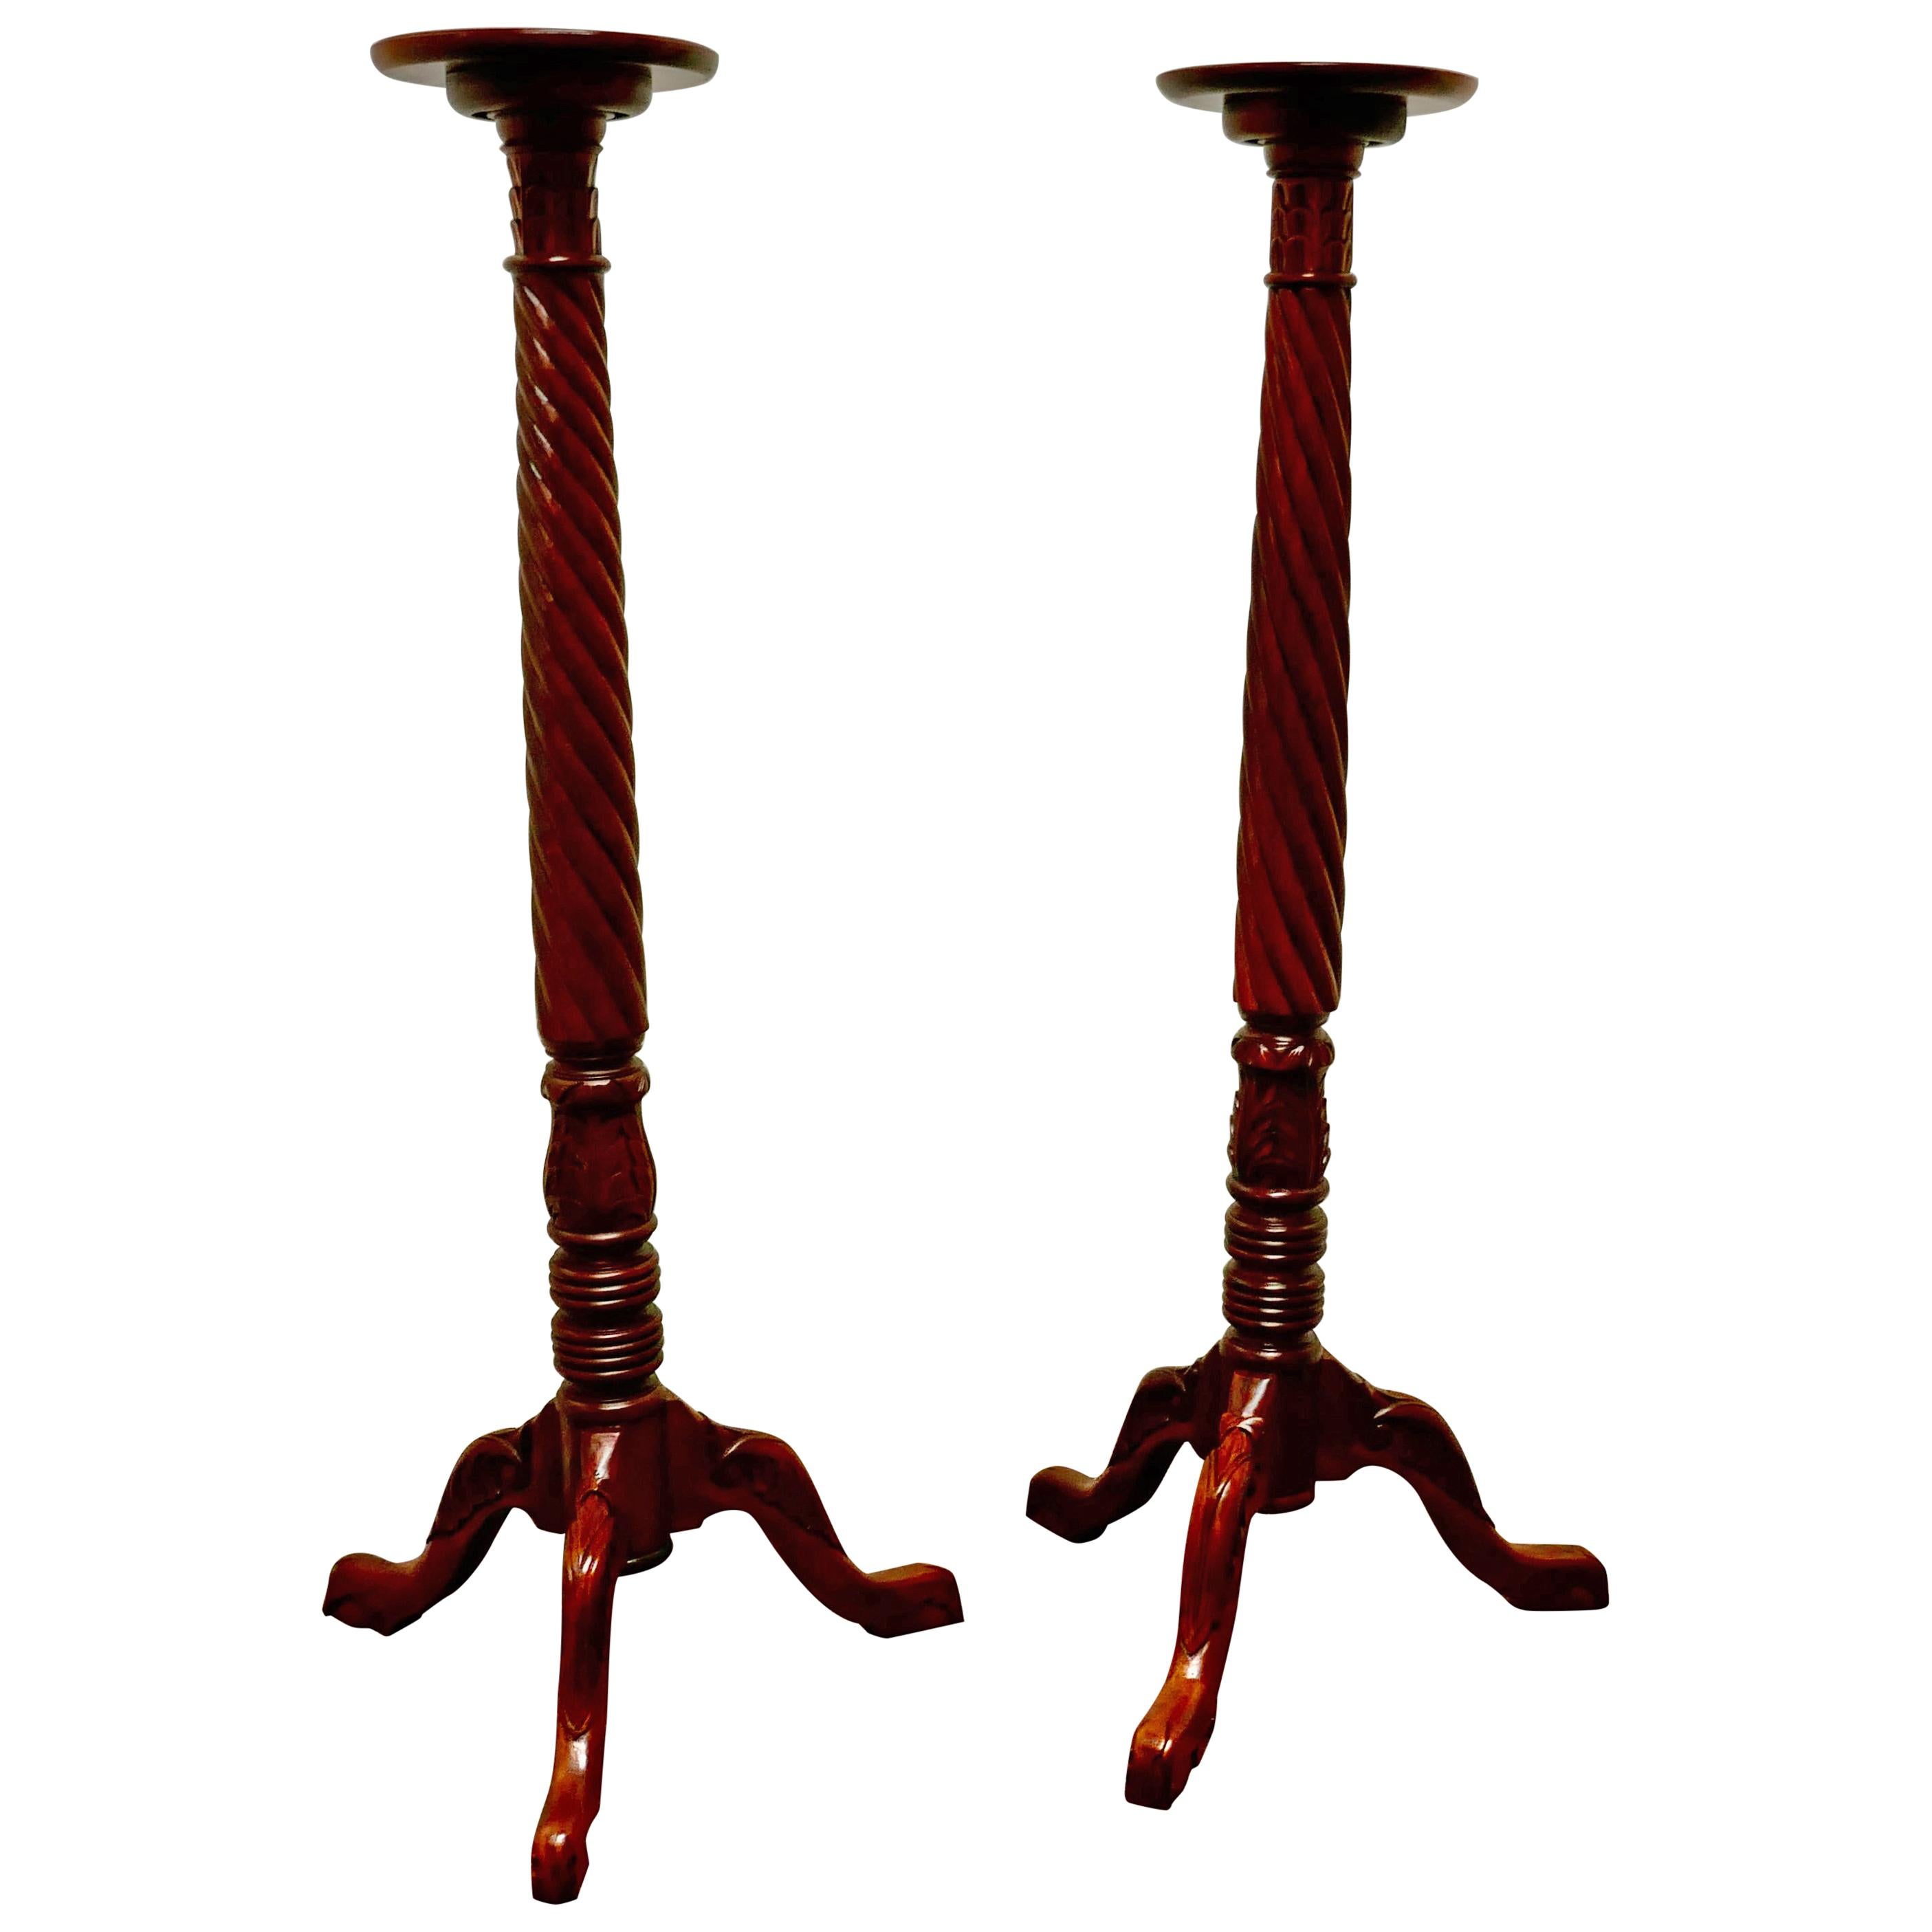 Tall Pair of Mahogany Torchère or Lamp Stands